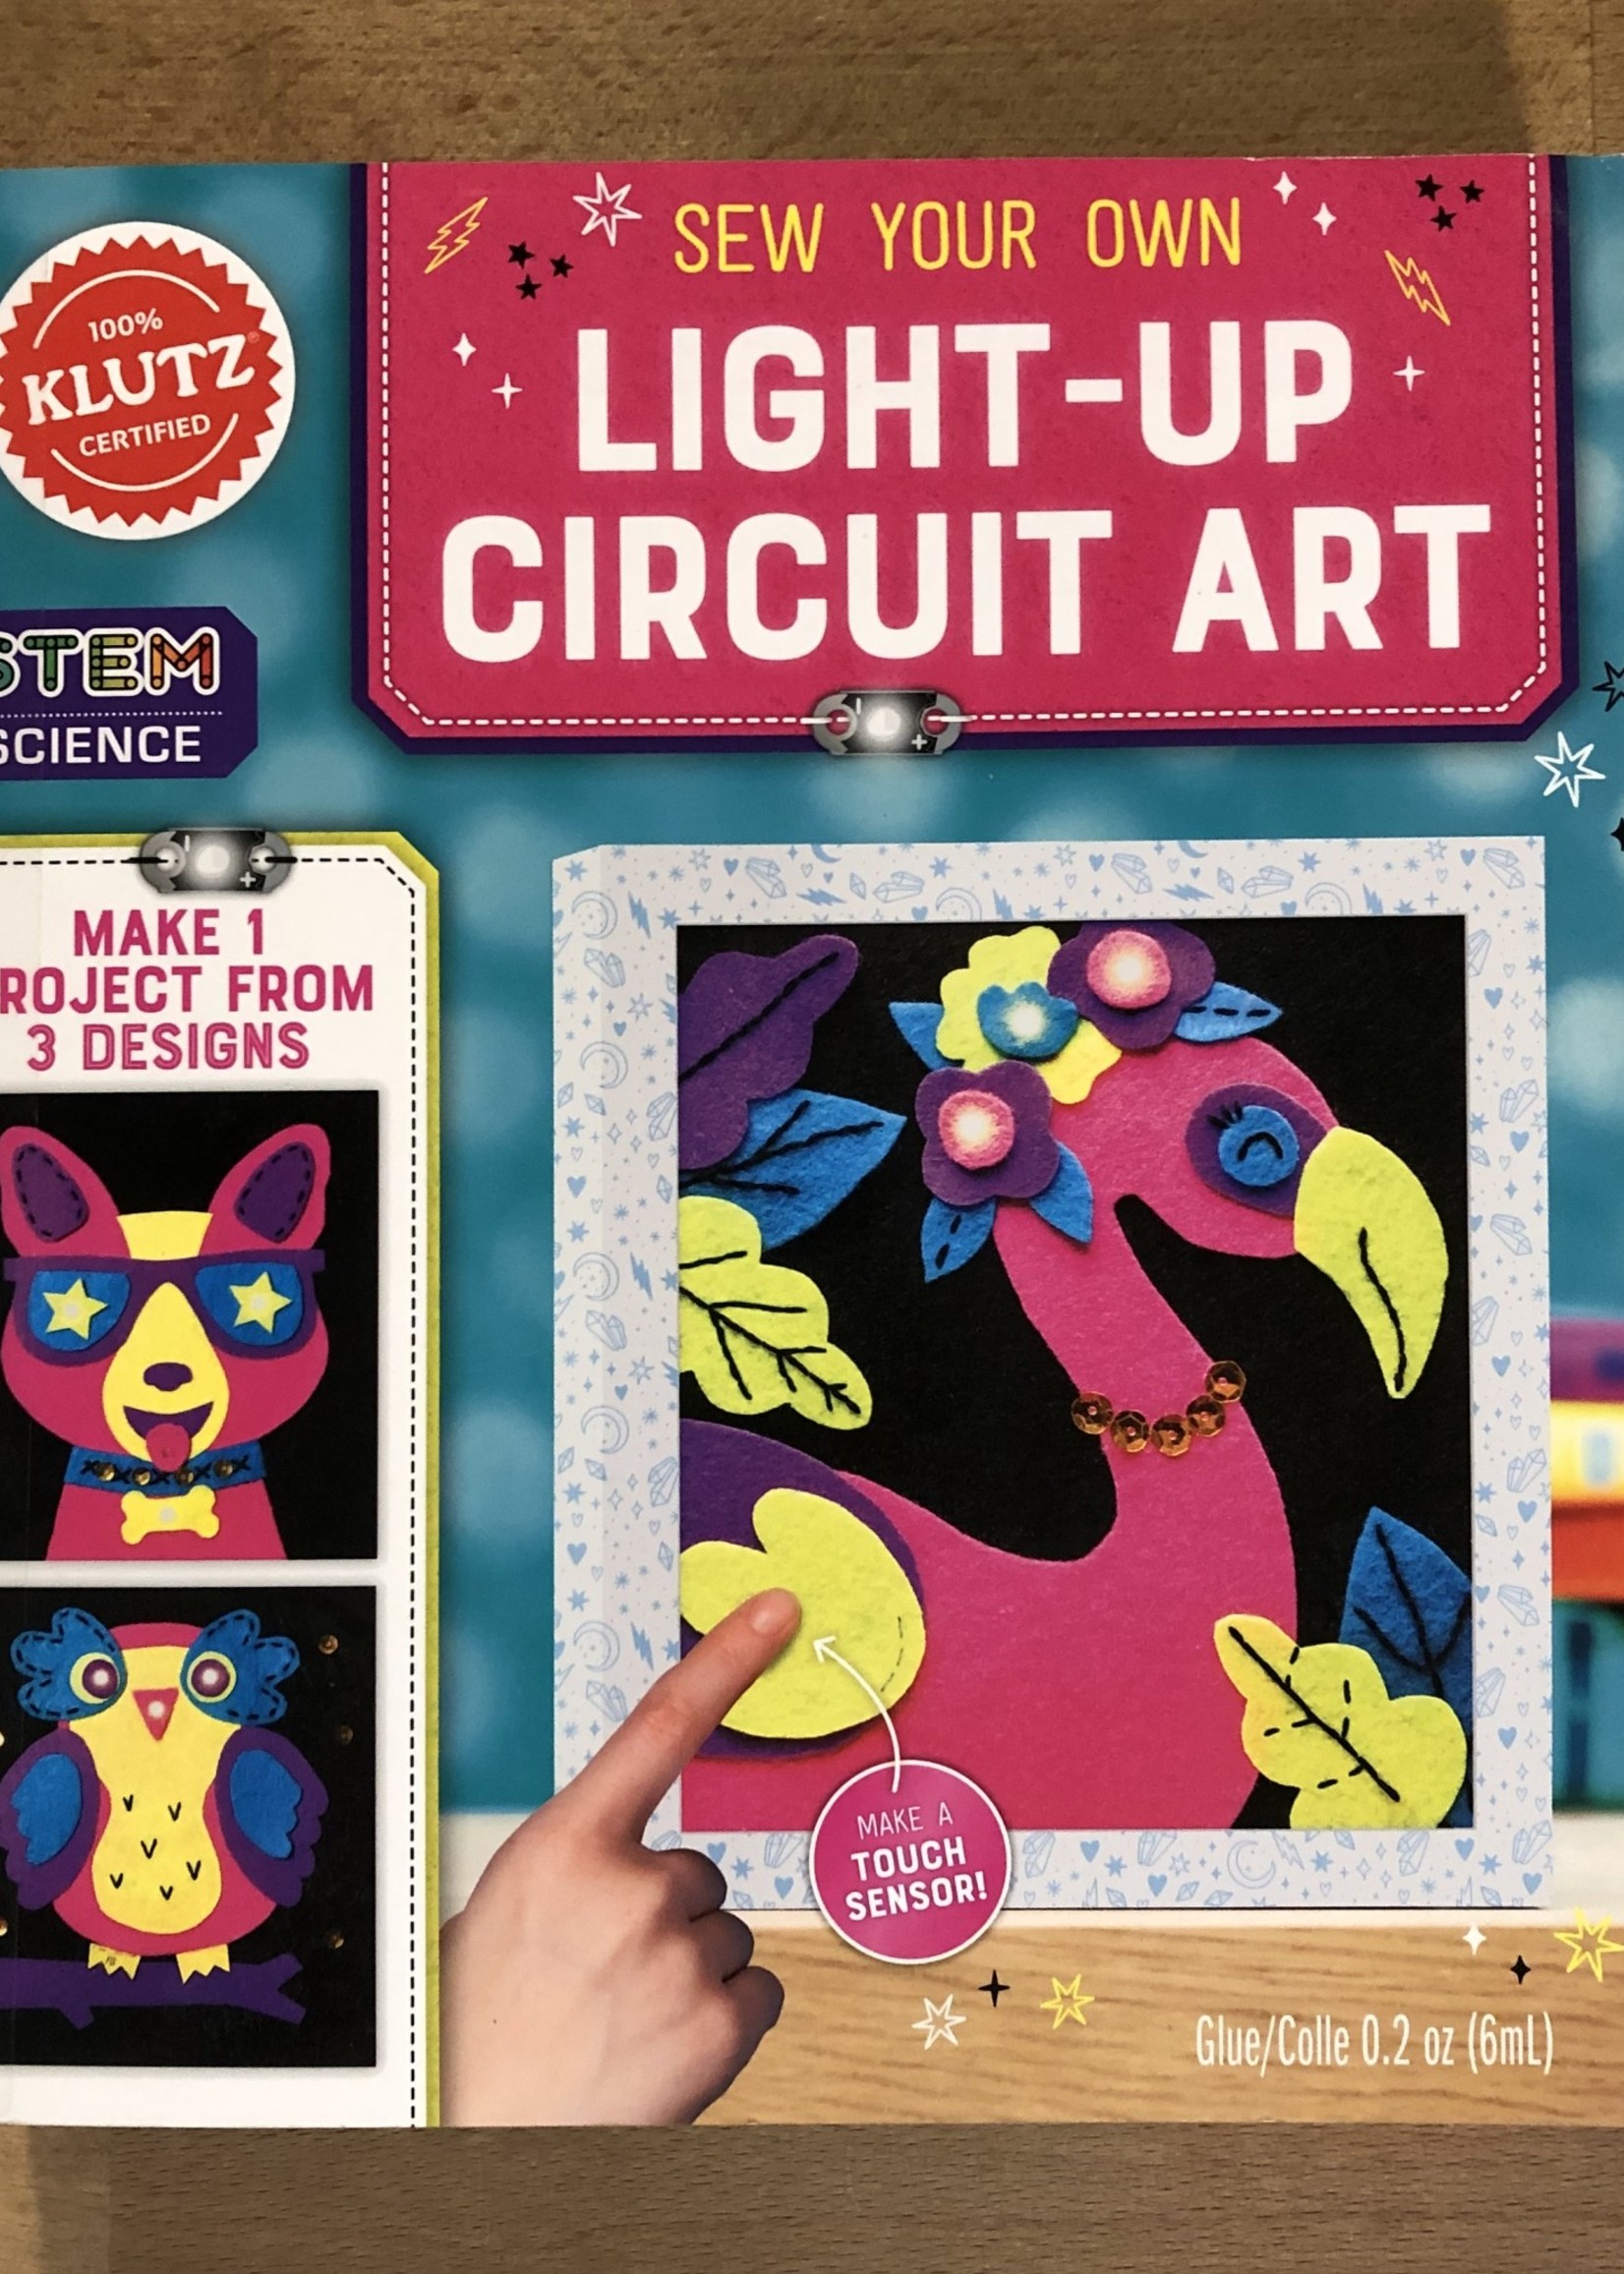 SEW YOUR OWN LIGHT UP CIRCUIT